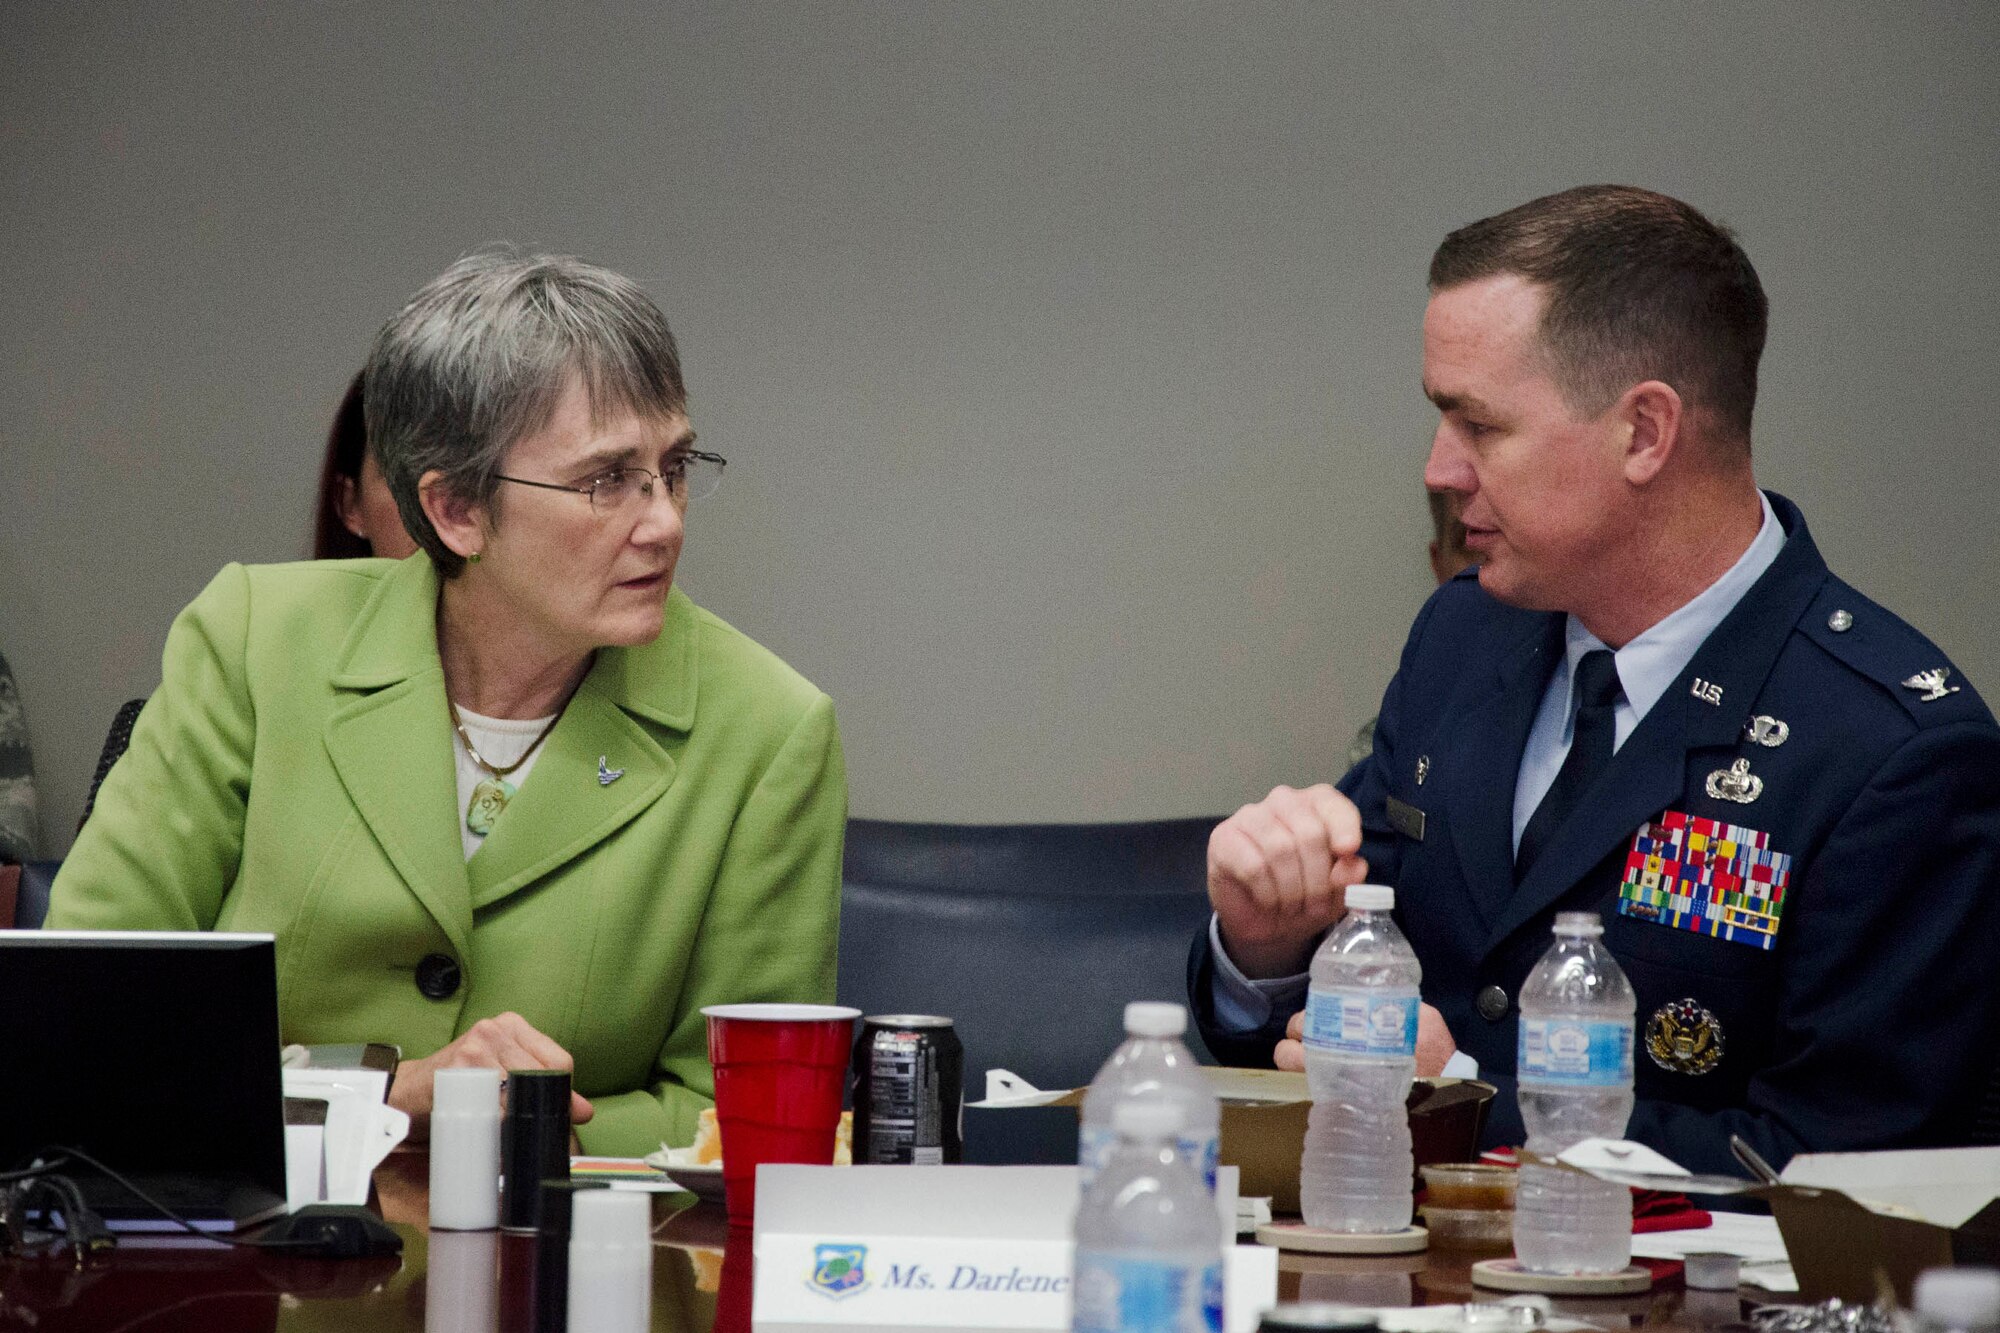 Col. Steven M. Gorski (right), commander of the Air Force Technical Applications Center, Patrick AFB, Fla., briefs Secretary of the Air Force Heather Wilson on AFTAC’s role in nuclear event detection.  Wilson visited the treaty monitoring center Feb. 8, 2018 to gain perspective into the Air Force’s largest sensor network and organization responsible for the U.S. Atomic Energy Detection System.  (U.S. Air Force photo by Susan A. Romano)